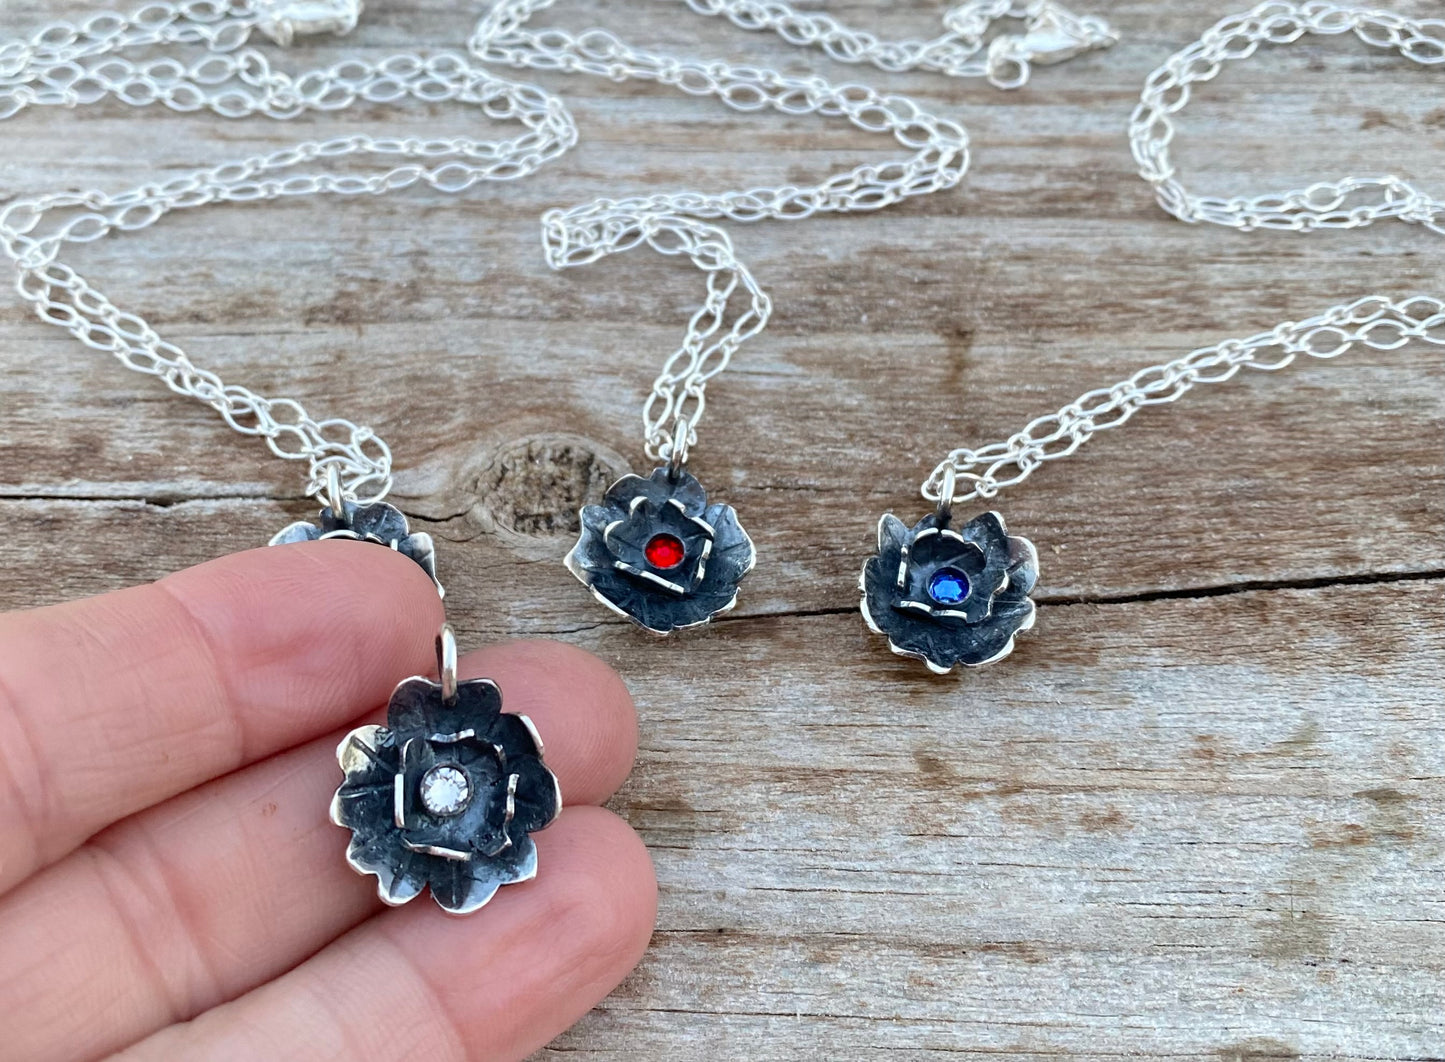 Winter blossom pendants - collectionsbytracy.com